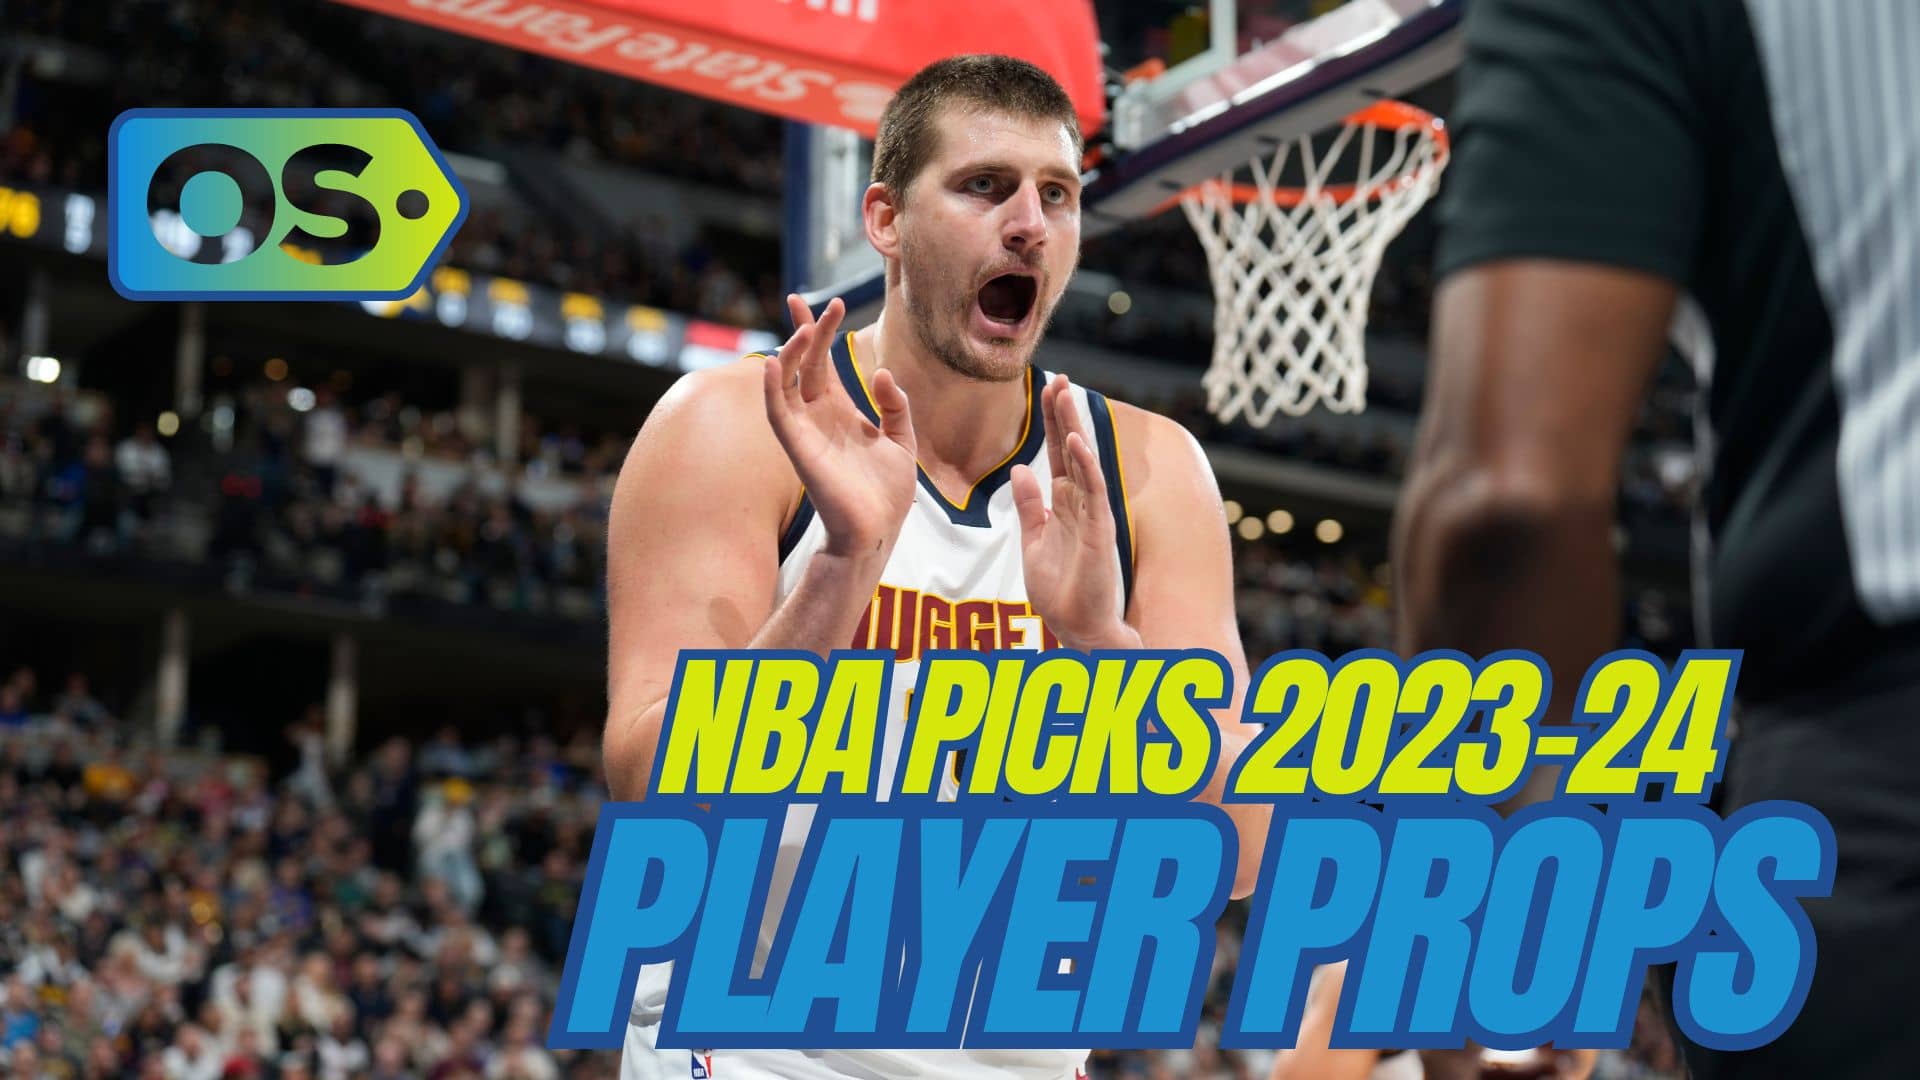 The best NBA player prop bets and picks today for Wednesday, February 28, include wagers on Nikola Jokic and Coby White.